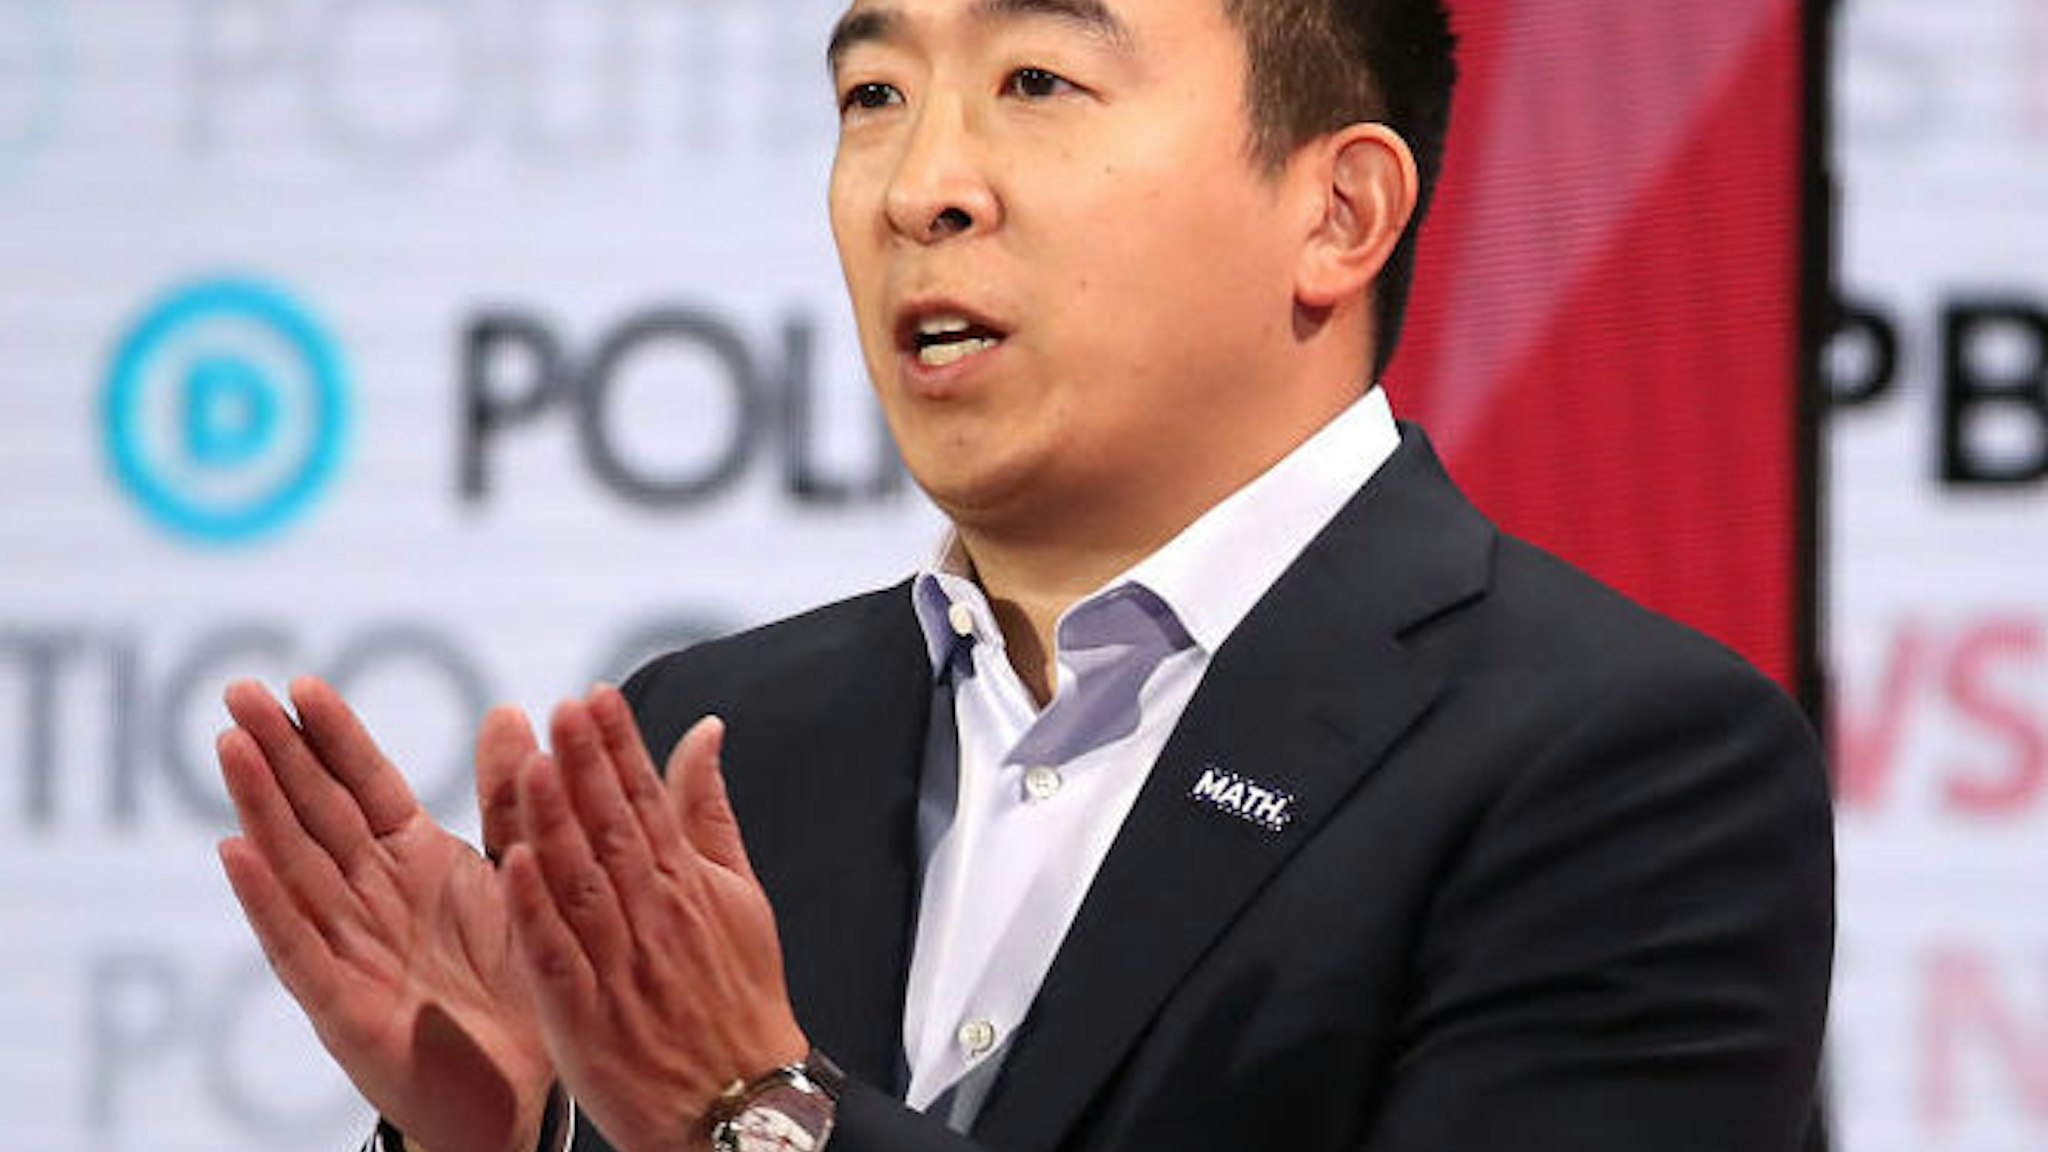 LOS ANGELES, CALIFORNIA - DECEMBER 19: Democratic presidential candidate former tech executive Andrew Yang speaks during the Democratic presidential primary debate at Loyola Marymount University on December 19, 2019 in Los Angeles, California. Seven candidates out of the crowded field qualified for the 6th and last Democratic presidential primary debate of 2019 hosted by PBS NewsHour and Politico.